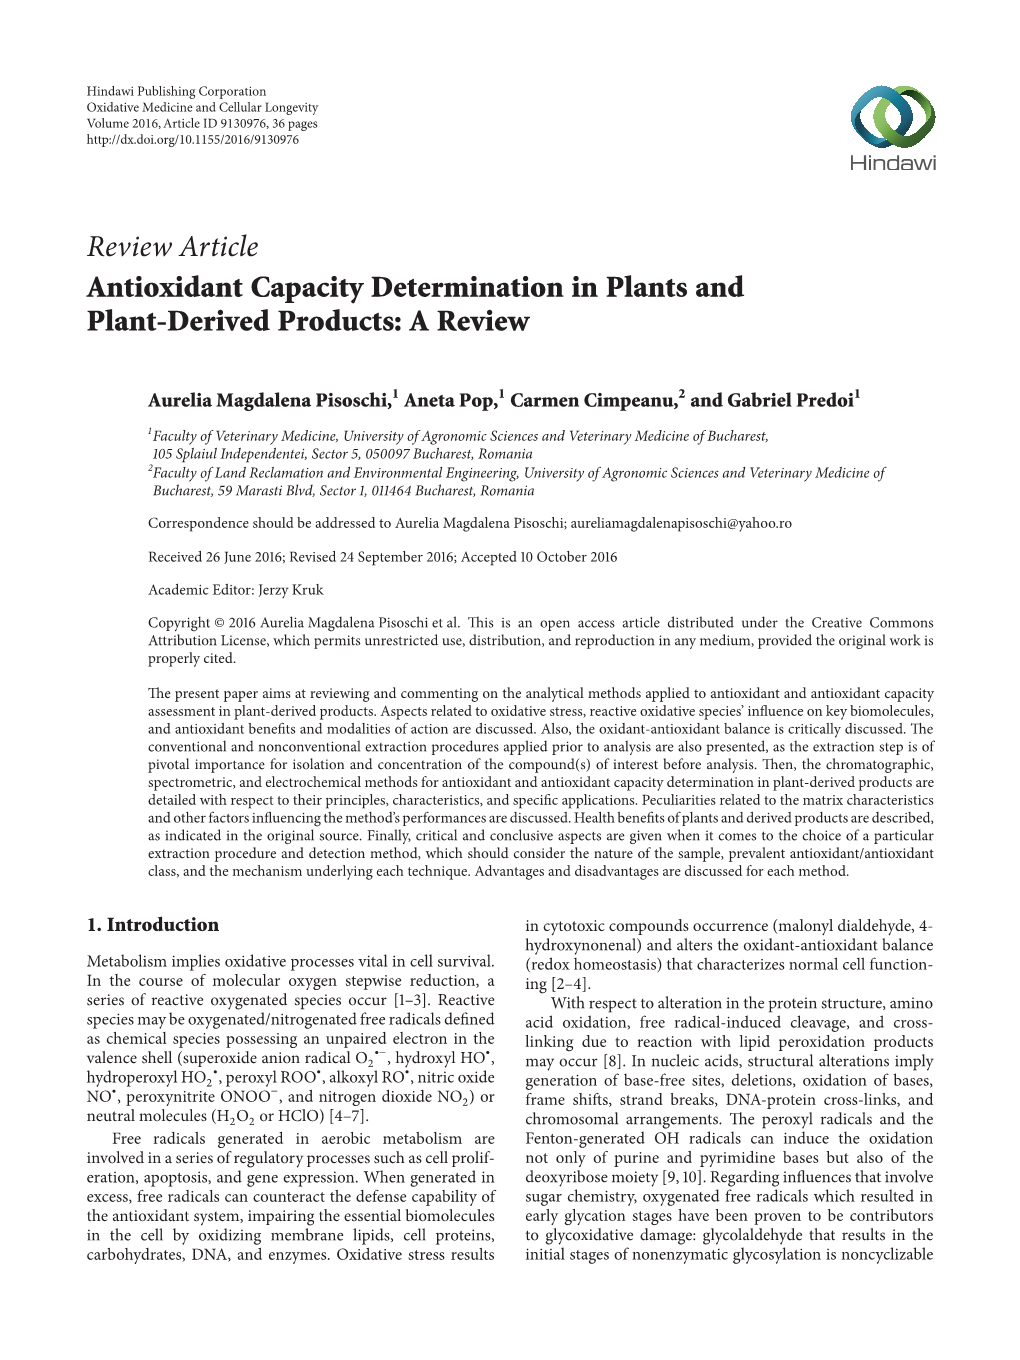 Review Article Antioxidant Capacity Determination in Plants and Plant-Derived Products: a Review